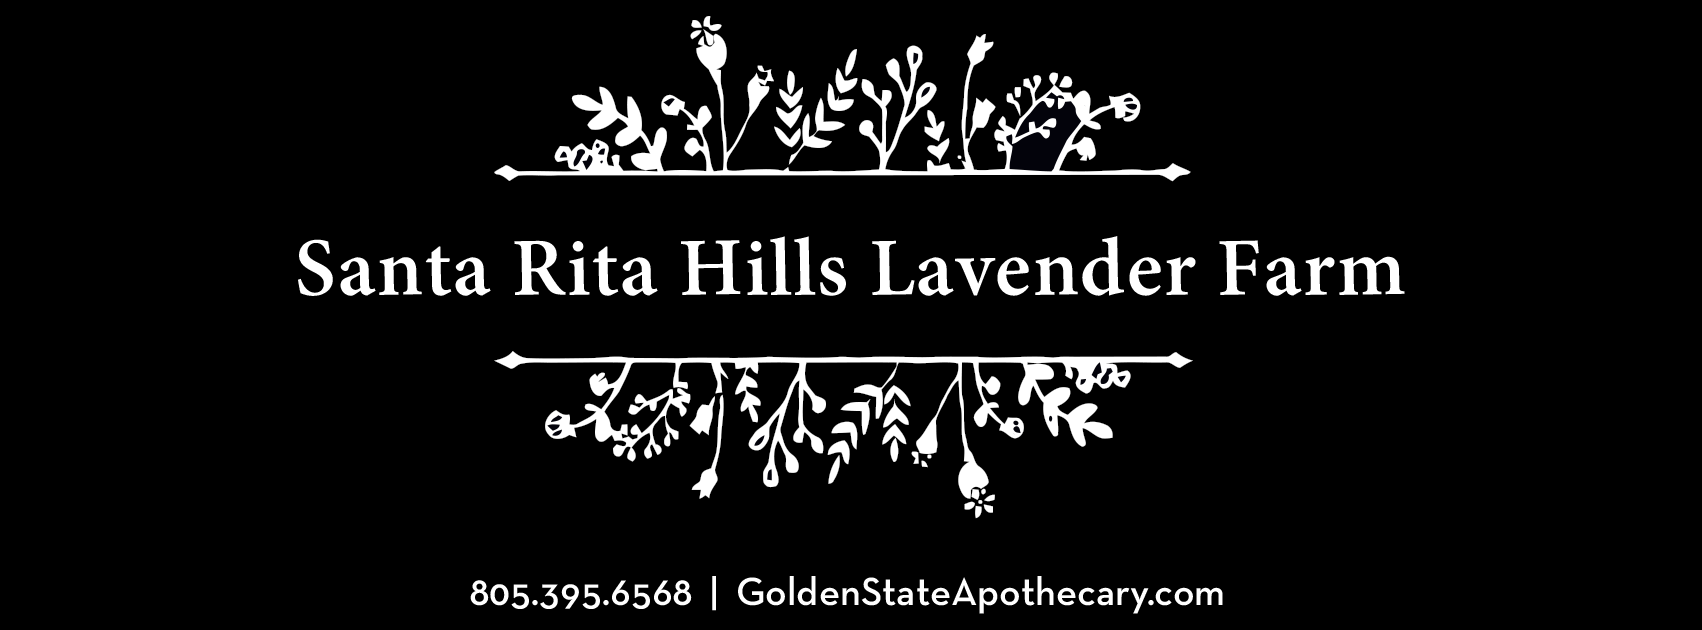 GOLDEN STATE APOTHECARY